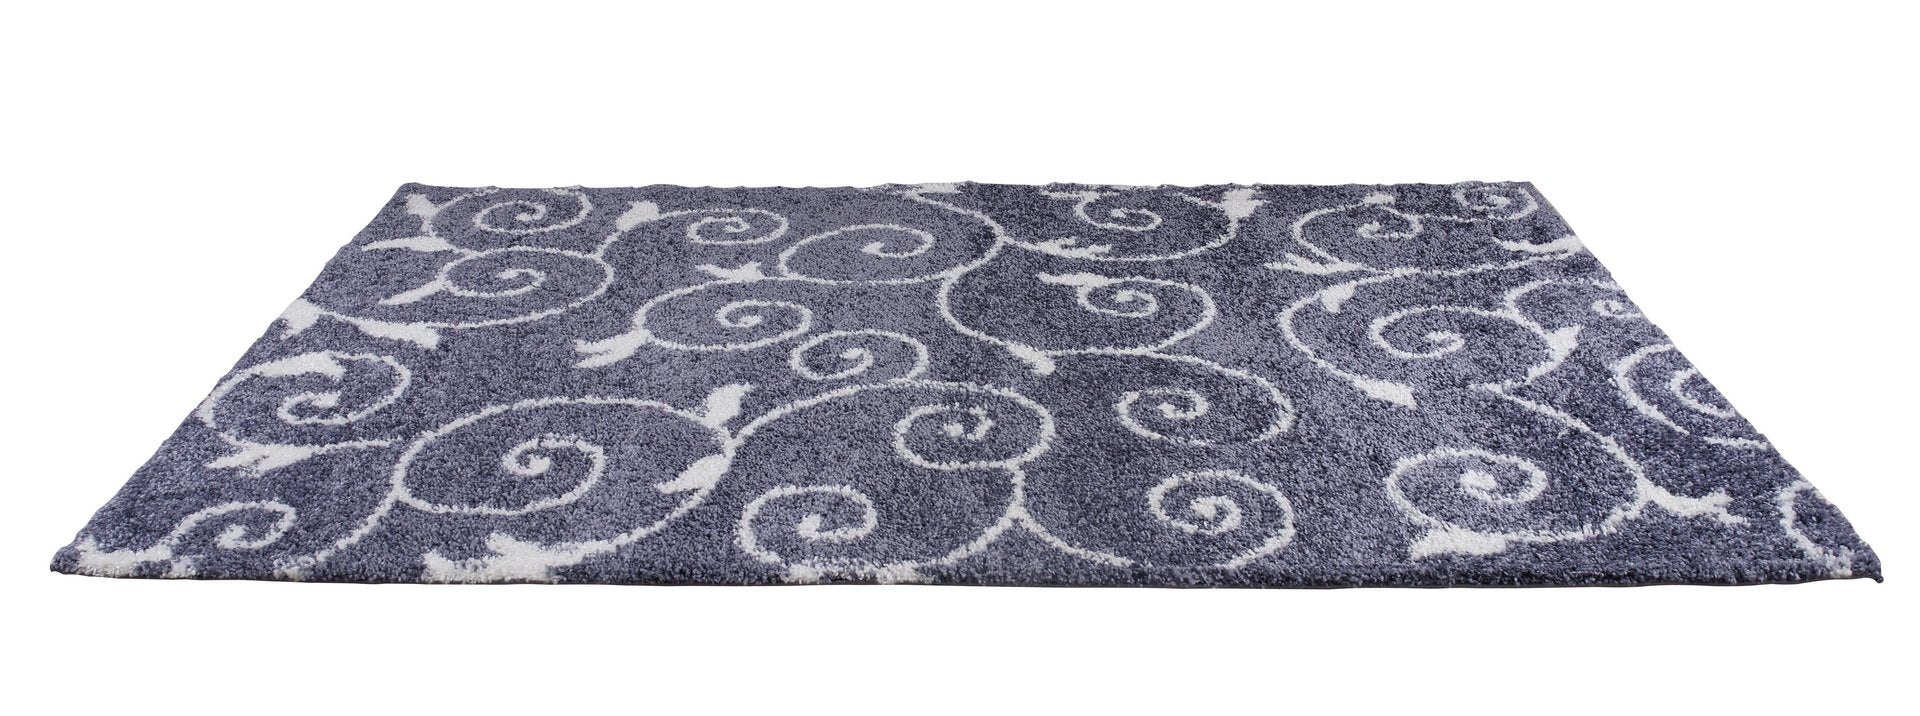 ladole rugs shaggy rabat abstract pattern sustainable spirals style indoor small mat doormat rug in dark grey white 2x5, 3x5 Runner Rug, Entry Way, Entrance, Balcony, Bedside, Home Office, Table Top